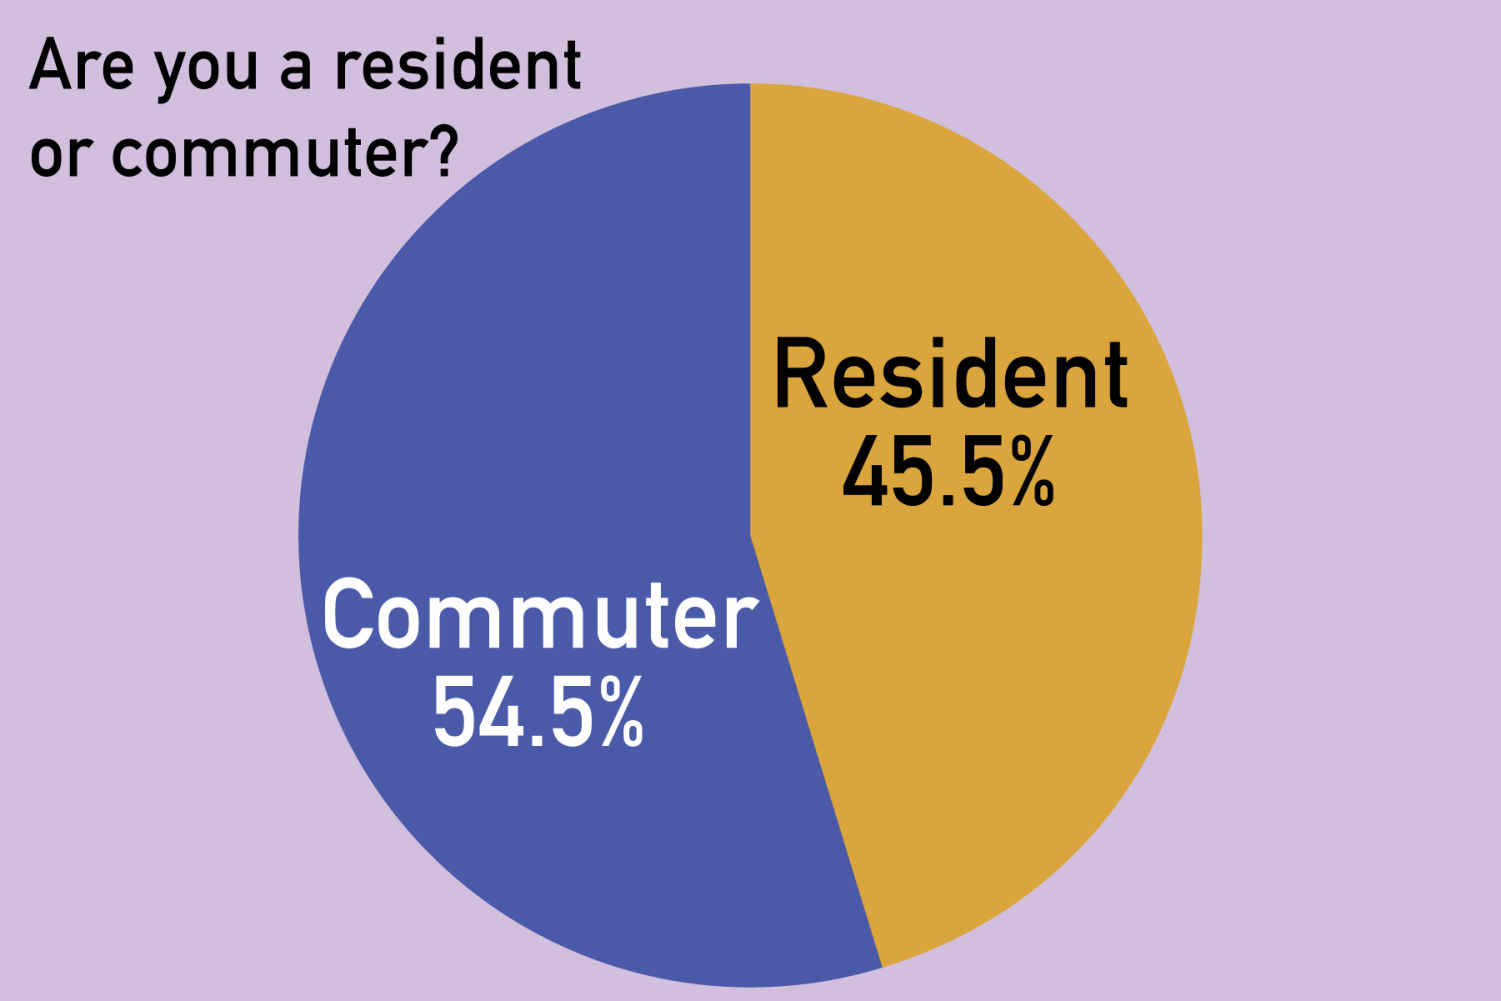 for survey about in-person semester, more than half of respondents were communters.